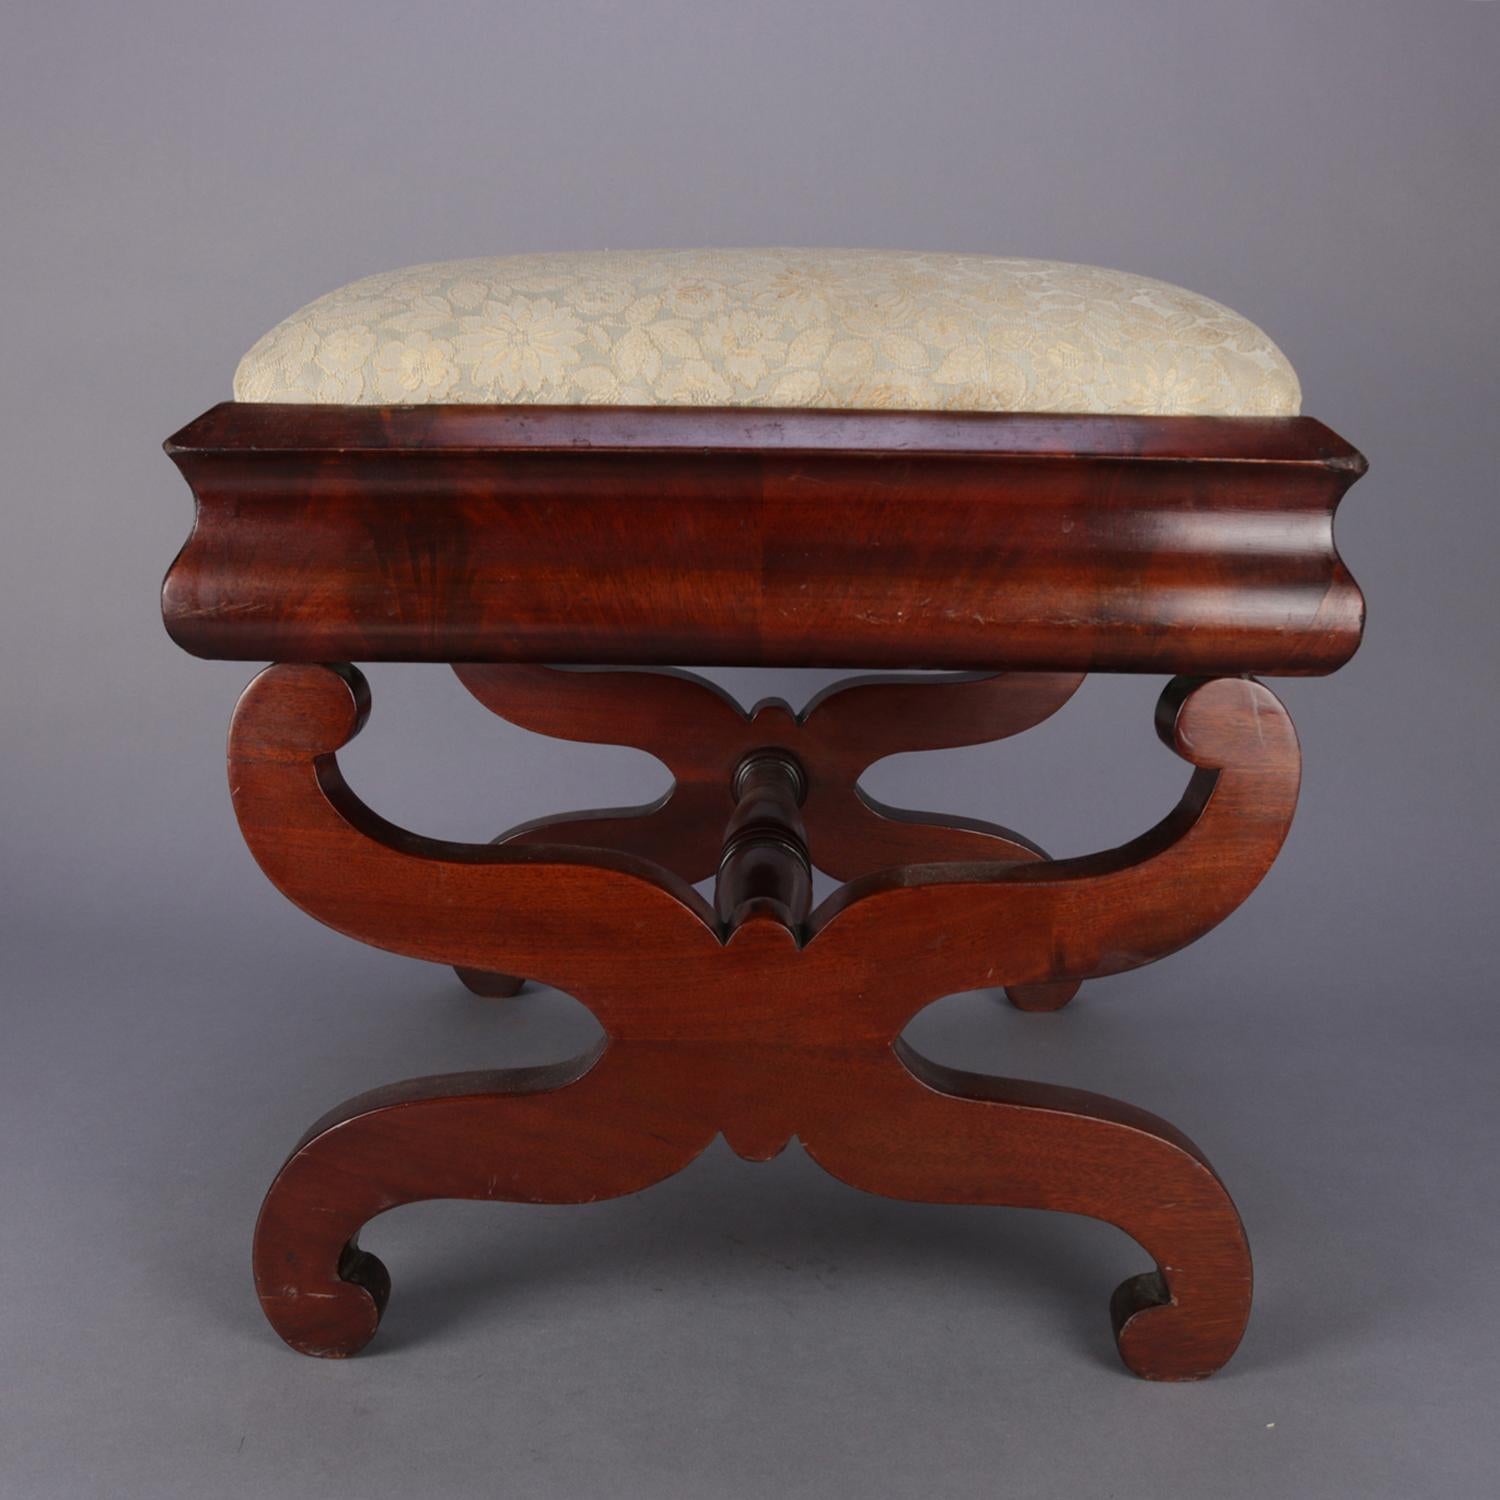 19th Century Antique American Empire Flame Mahogany Ogee Upholstered Footstool, circa 1840